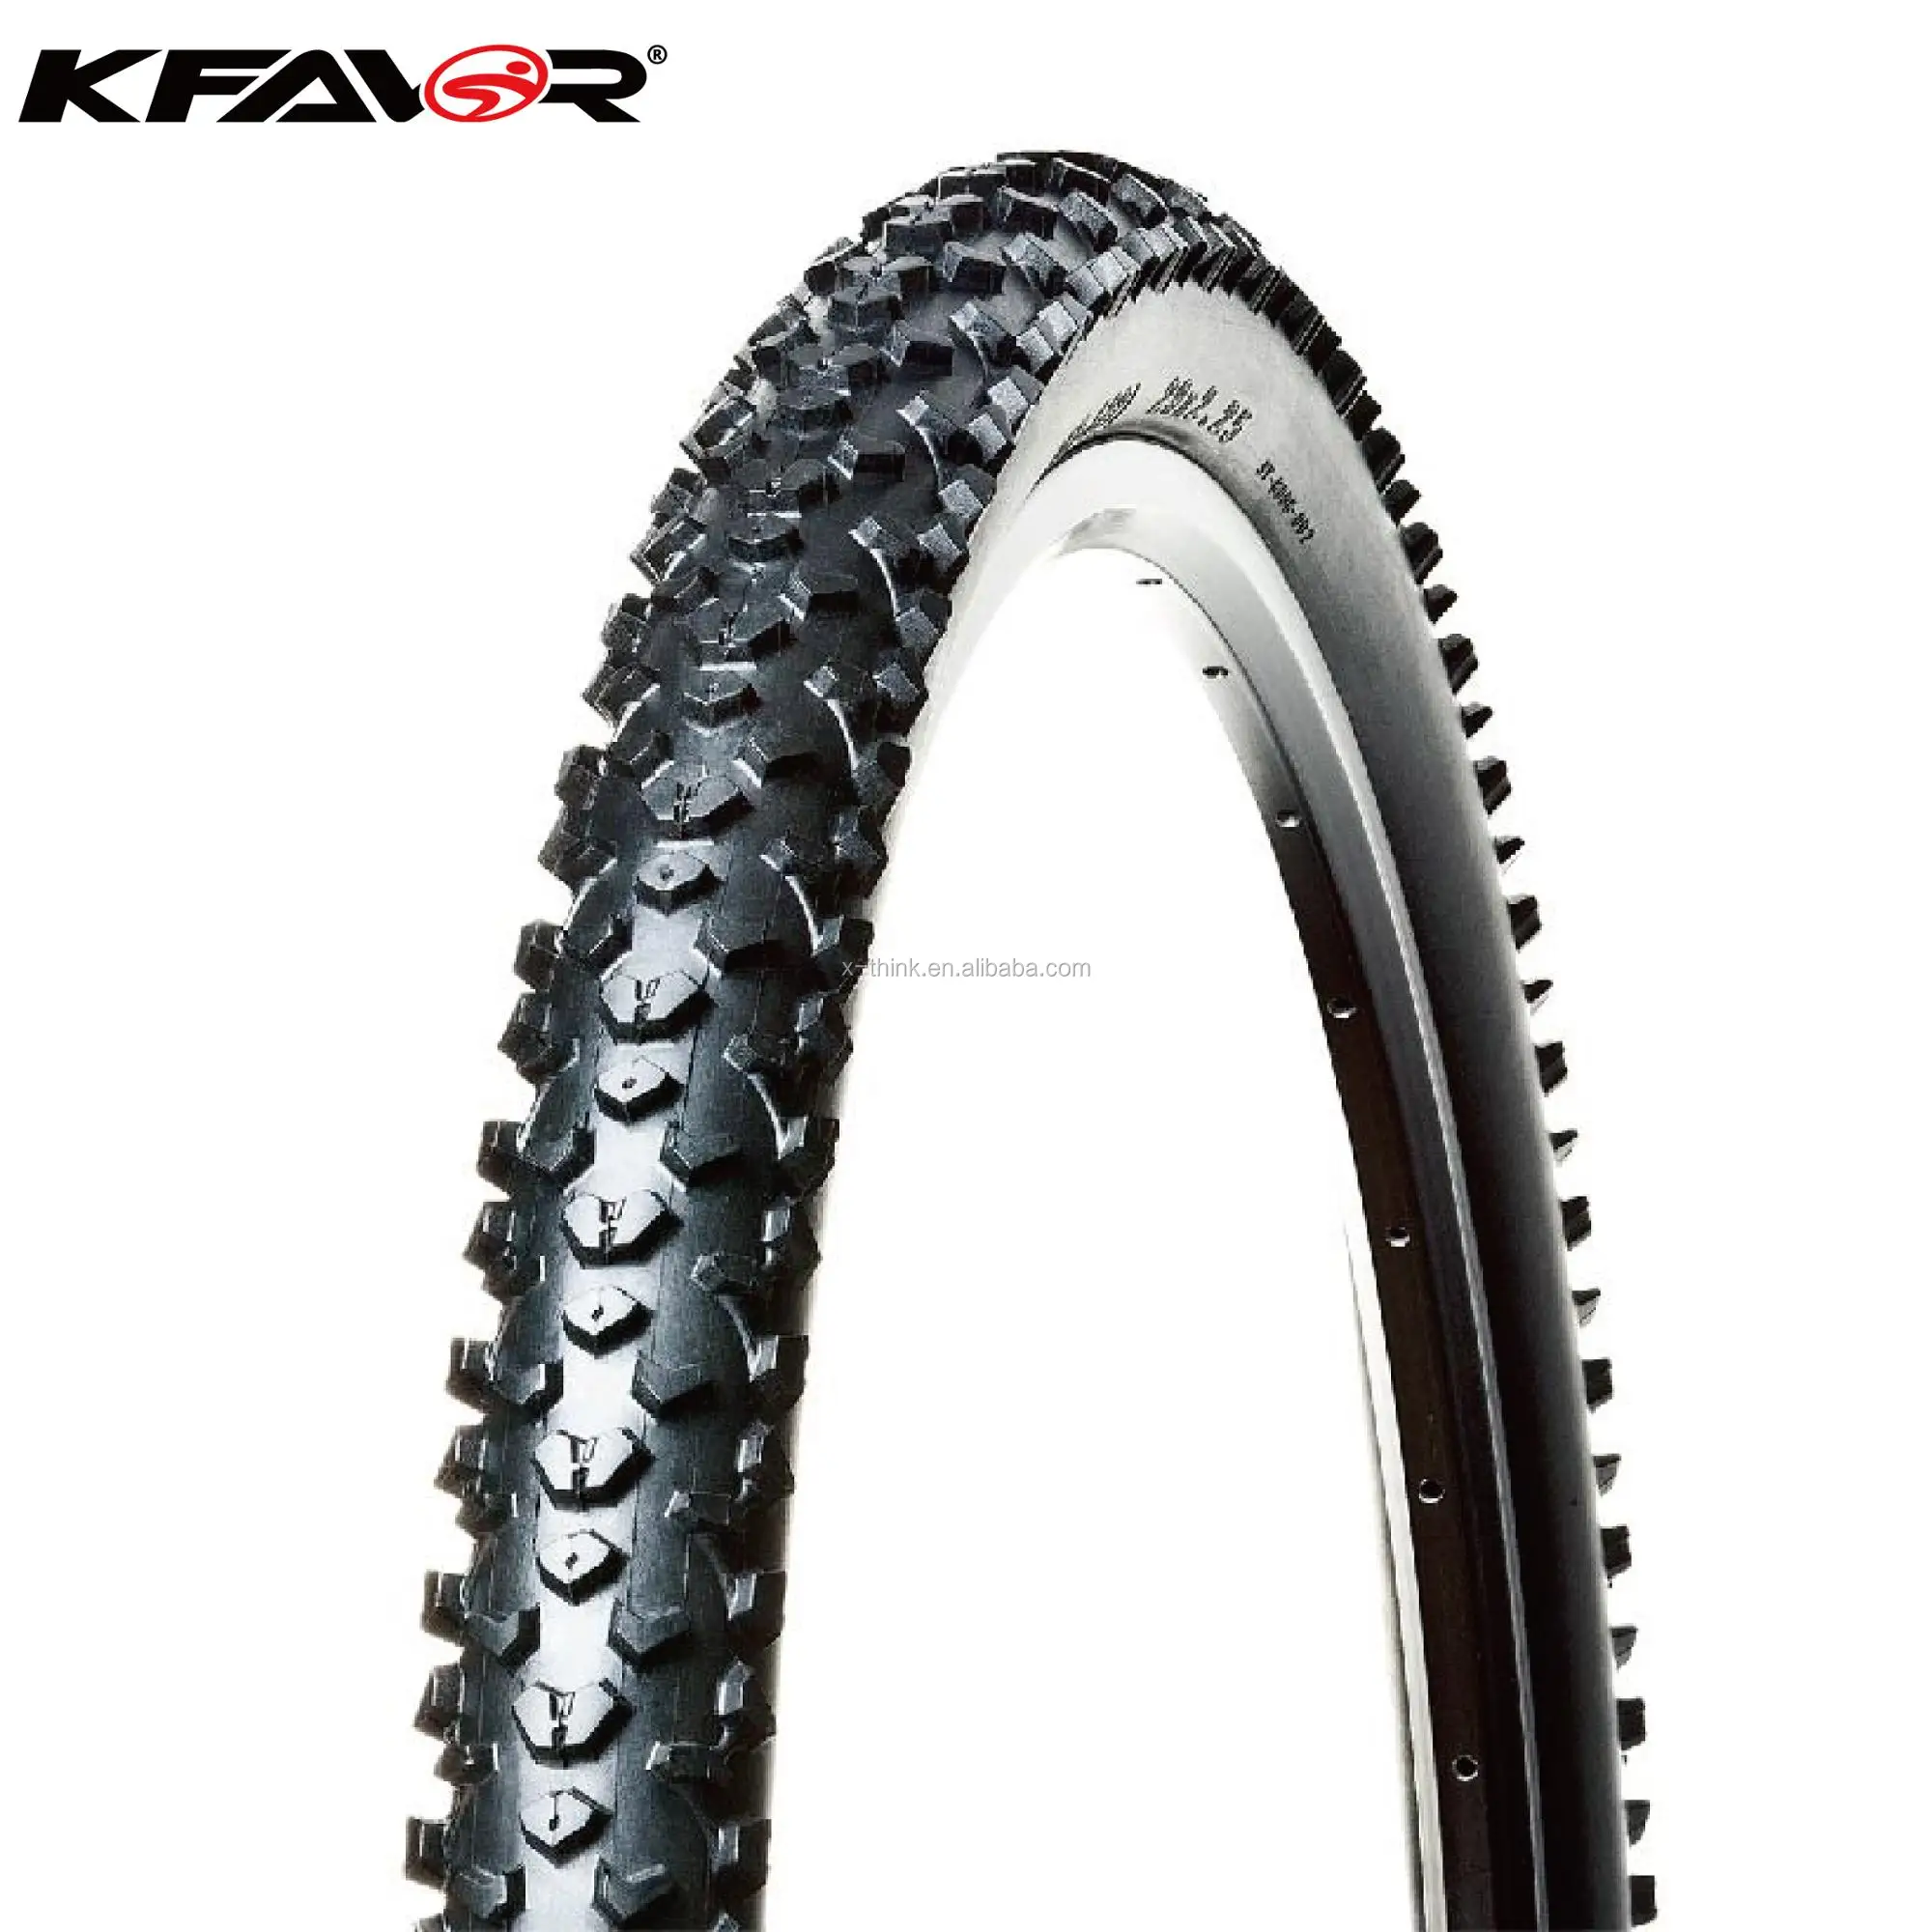 maxxis bicycle tires